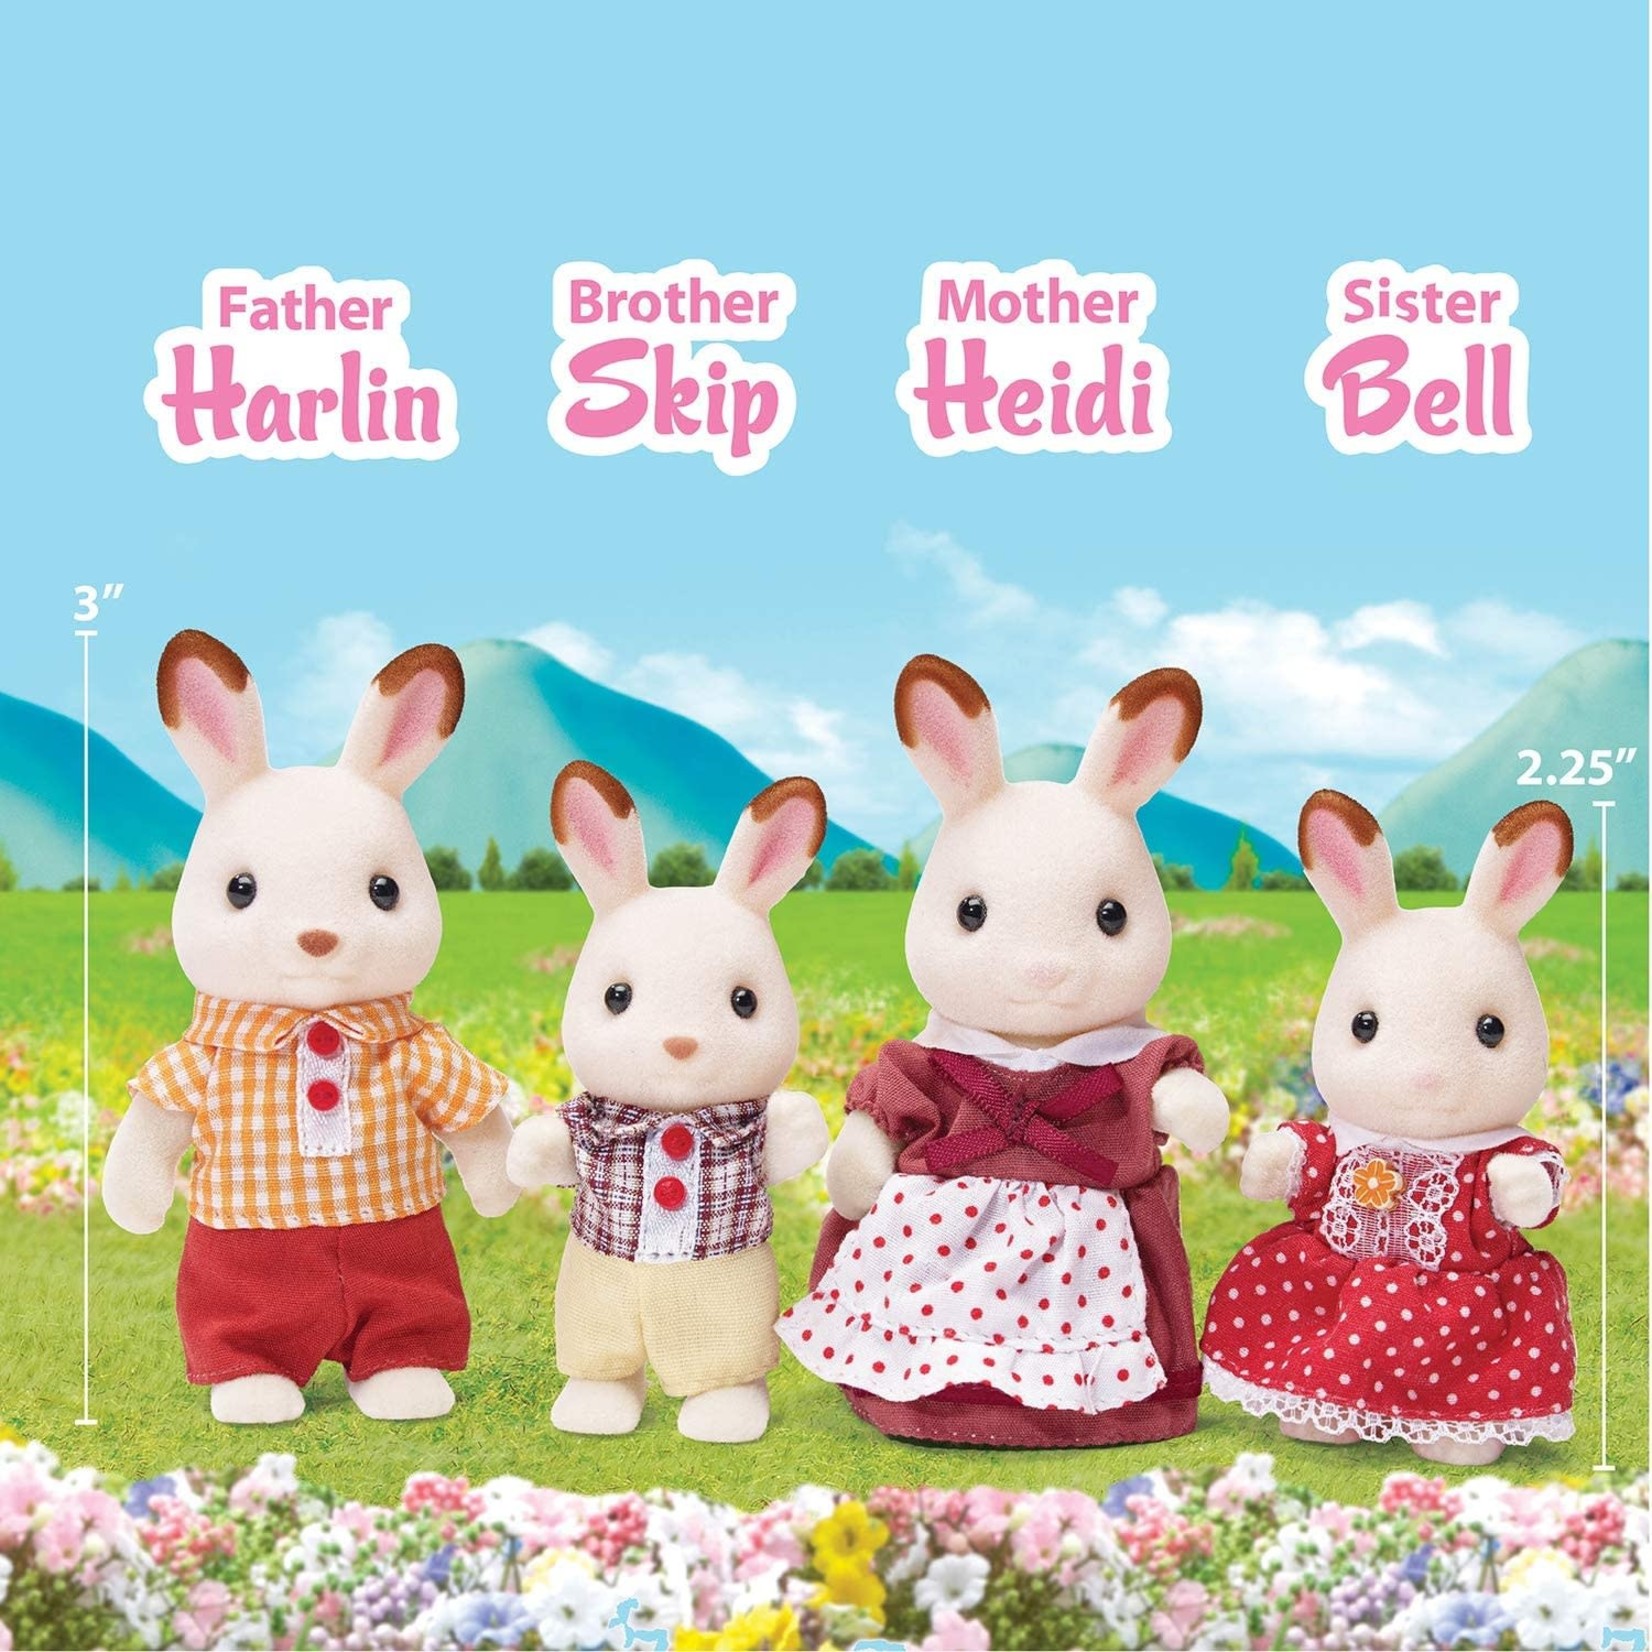 Calico Critters Calico Critters Hopscotch Rabbit Family Set